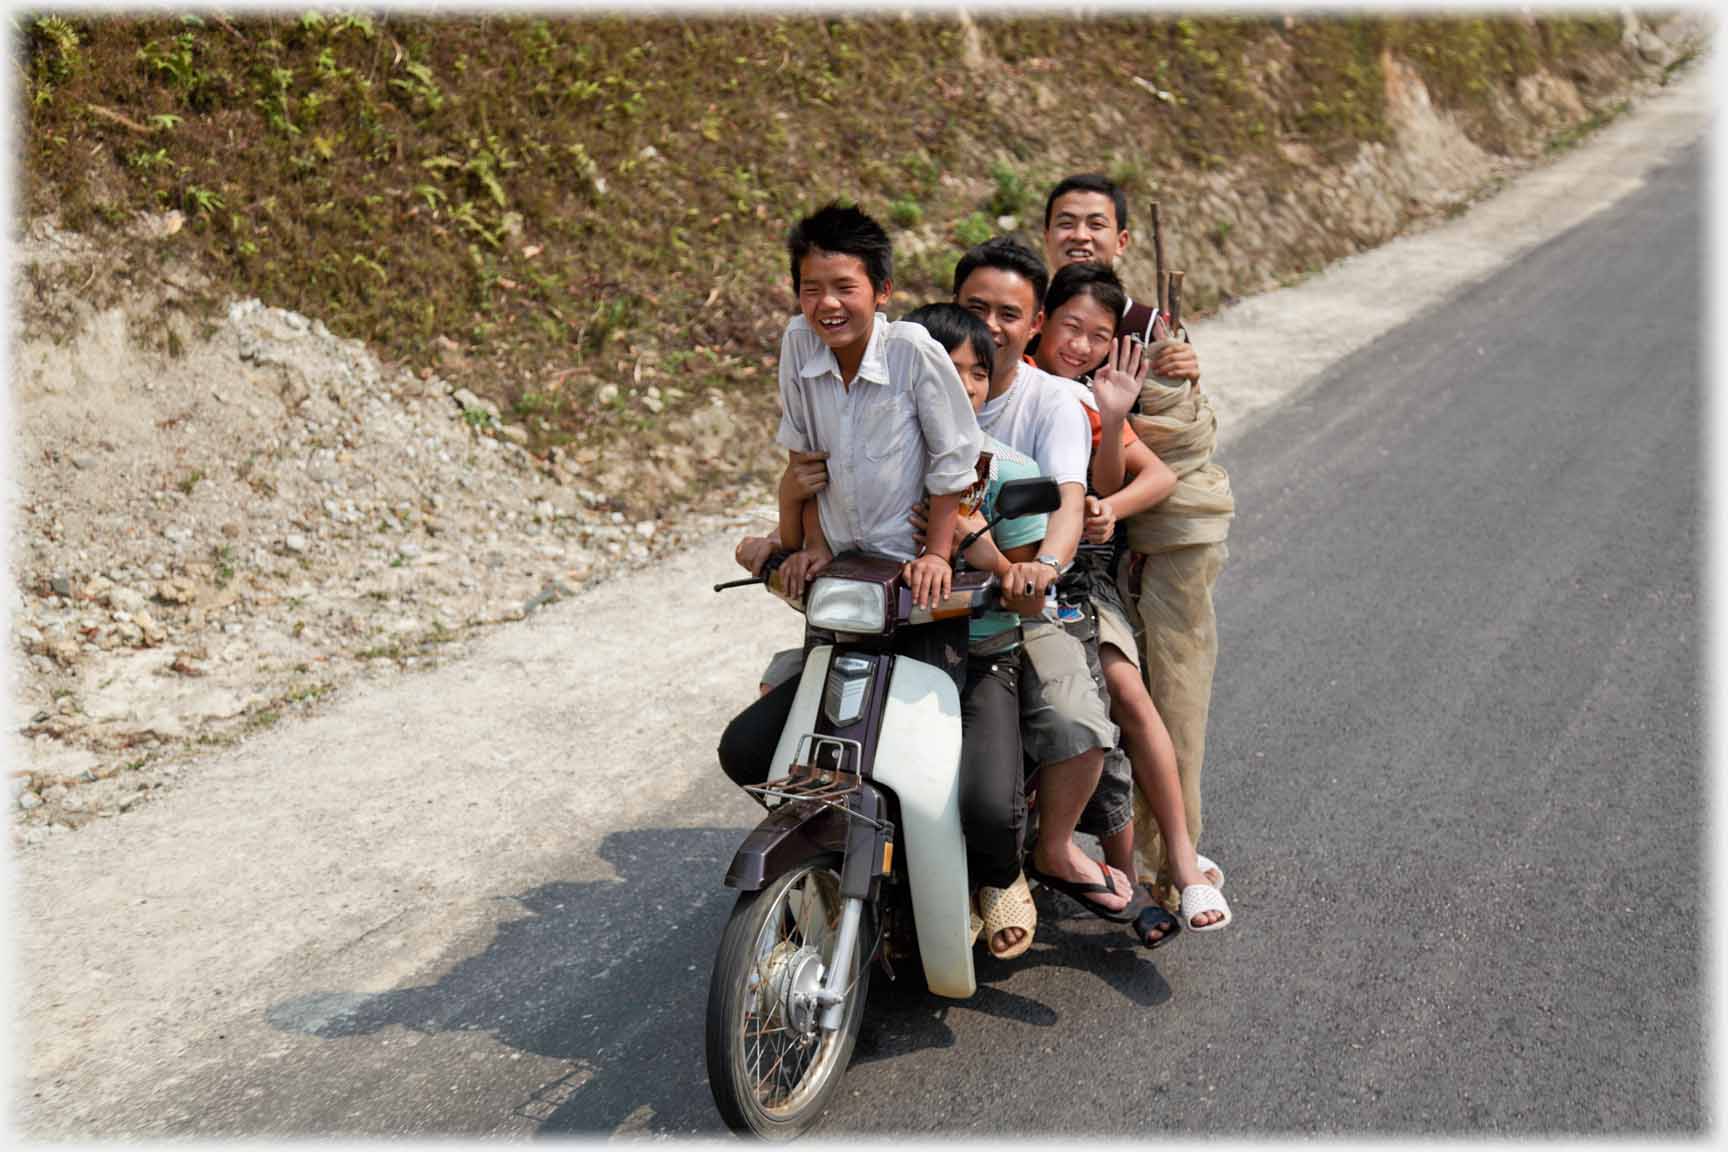 Facing motorbike, five heads can be seen and five feet, but six left hands.